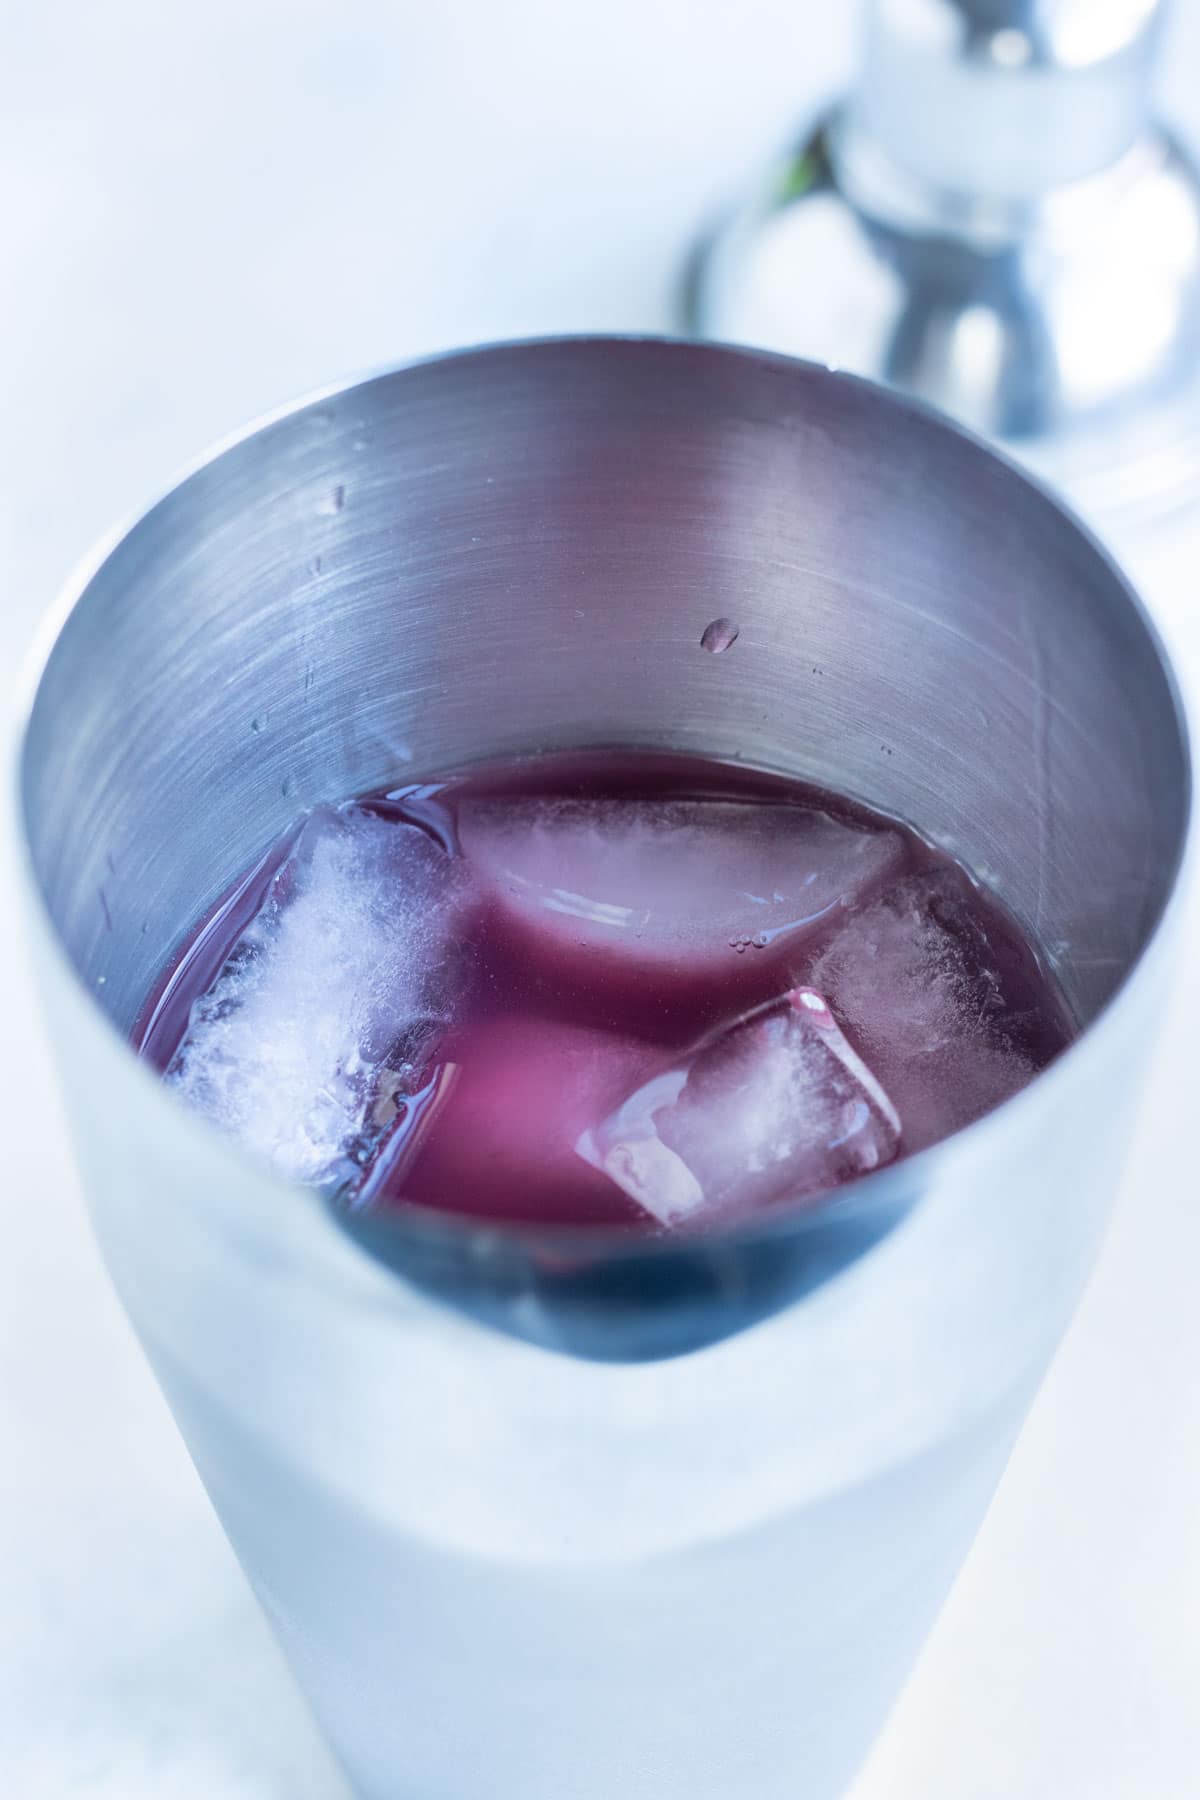 Ingredients and ice are added to the shaker while making this drink.